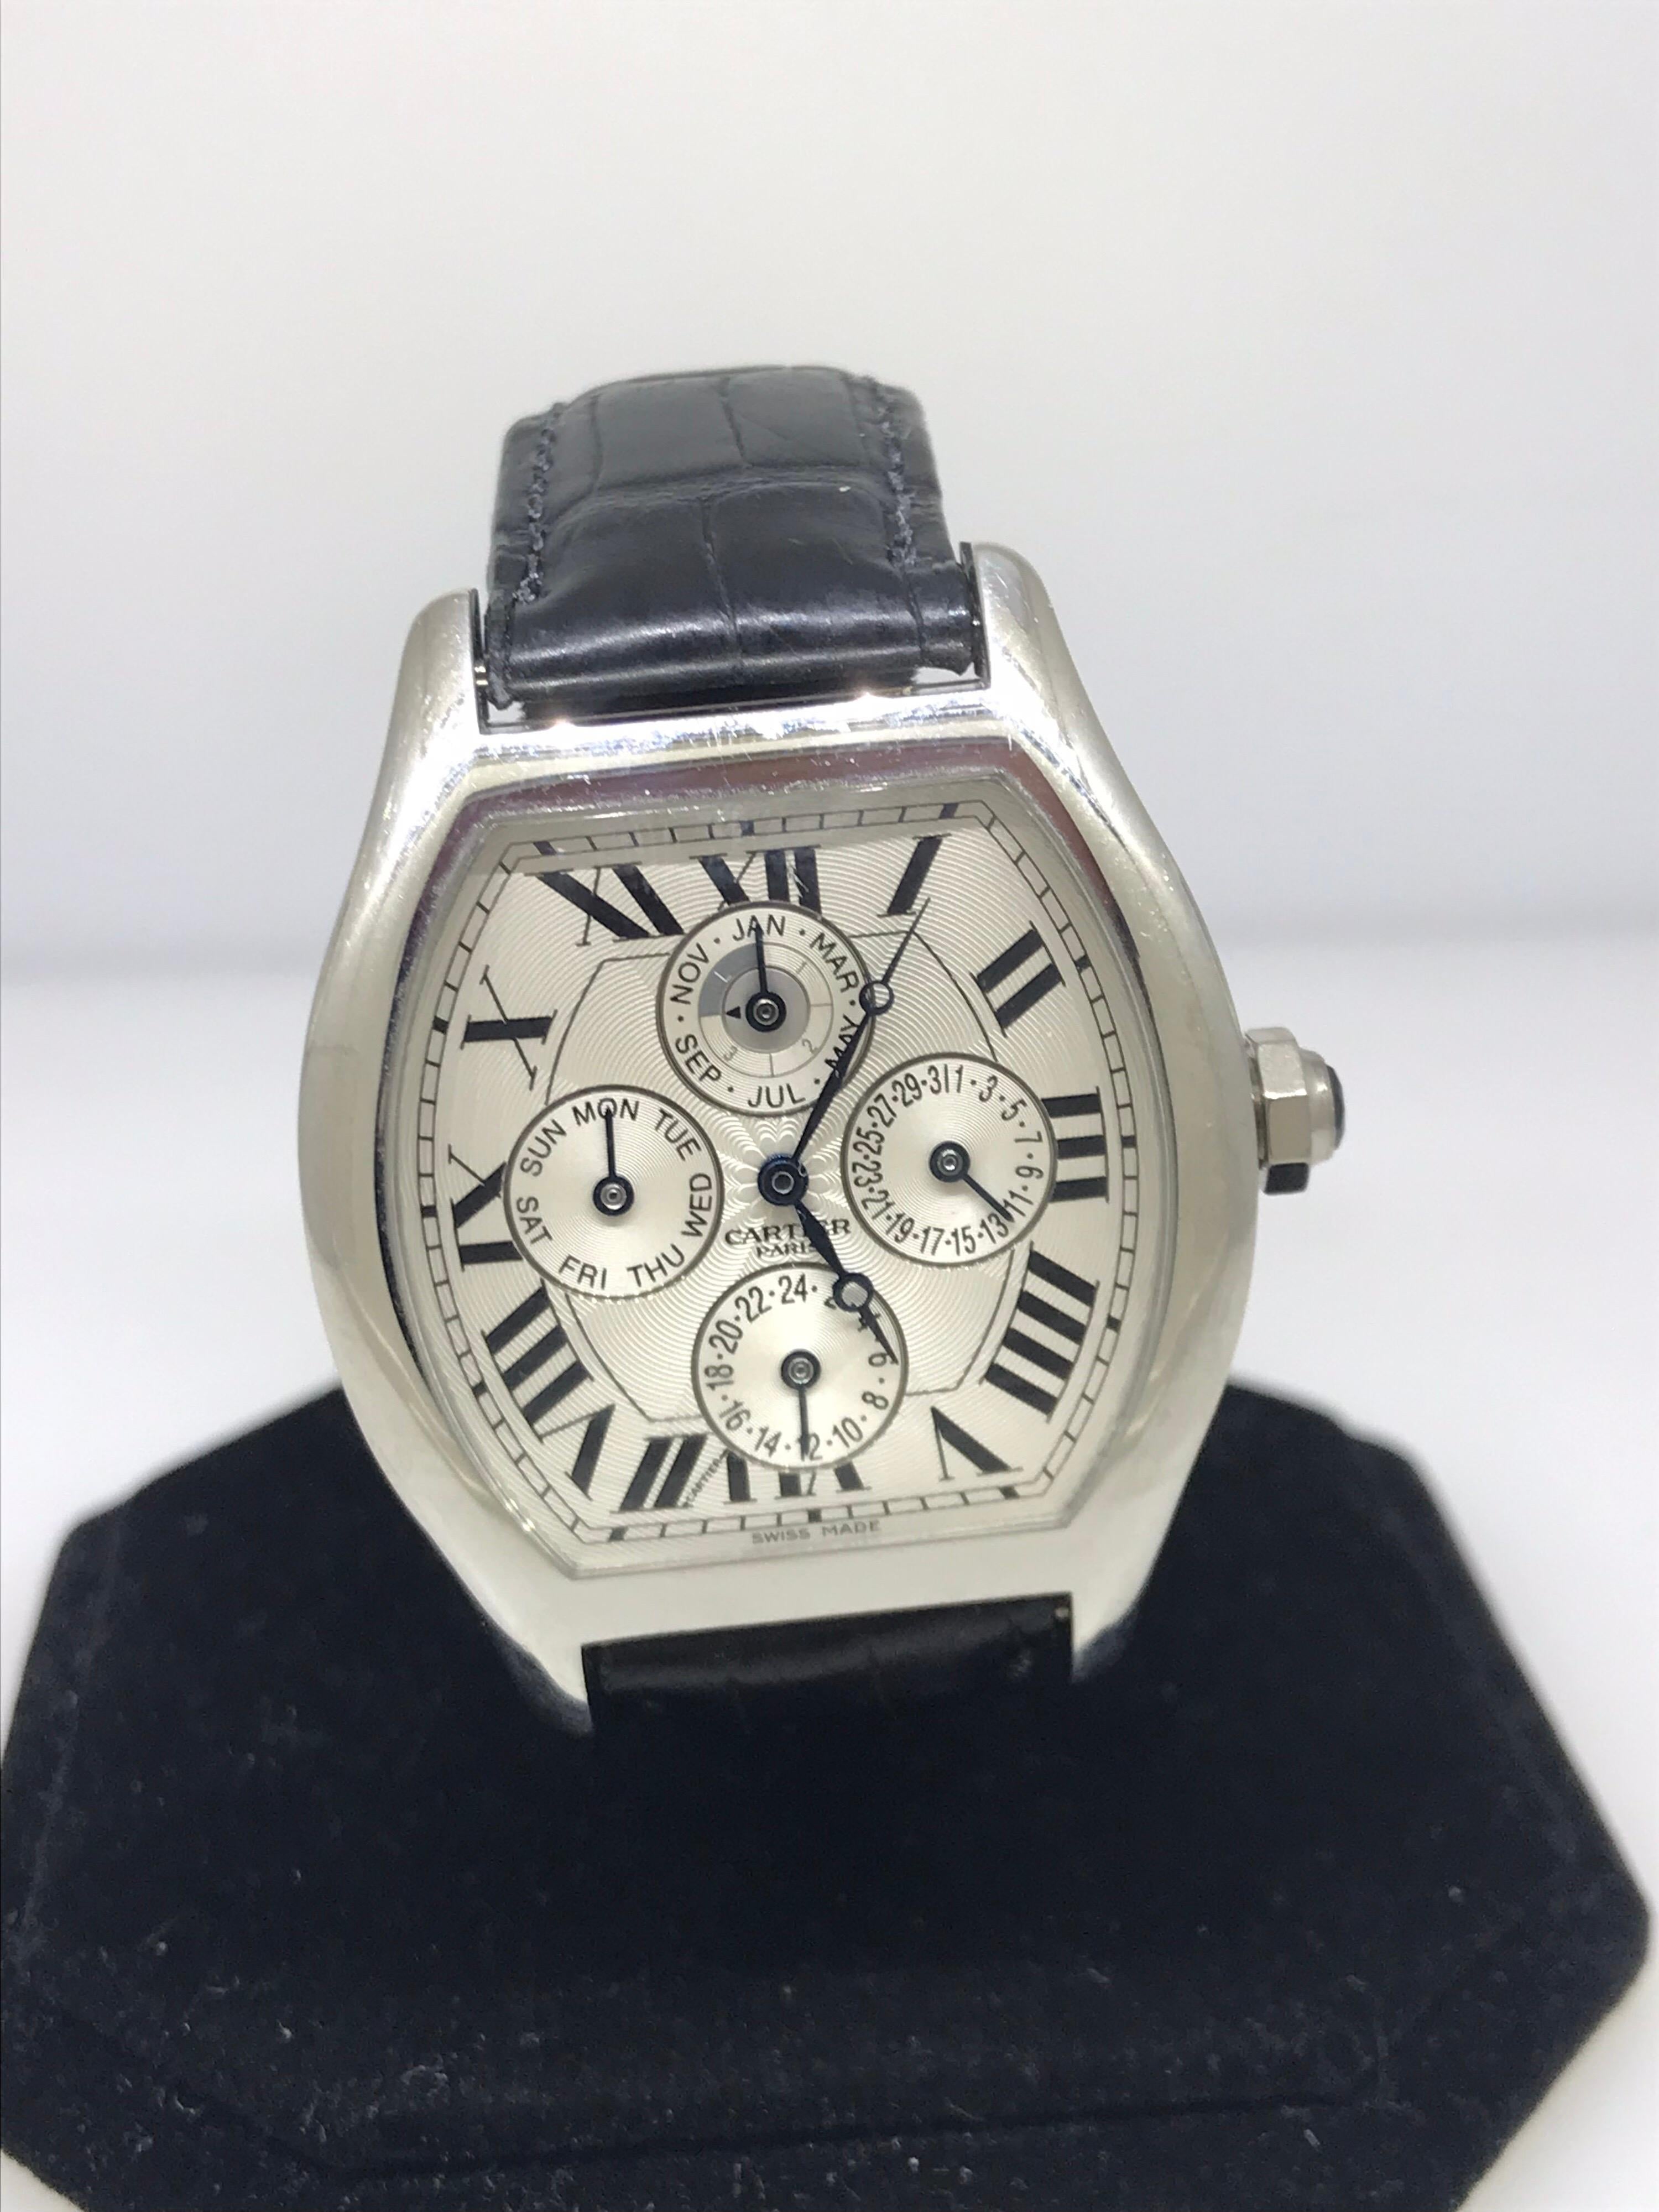 Cartier Tortue Men's Watch

Model Number: W1540551

100% Authentic

Pre owned in excellent condition

Comes with a generic watch box

Platinum Case

Silver dial and subdials

Watch Functions: Hours, Minutes, Day, Date, Month, Leap Year, Dual Time